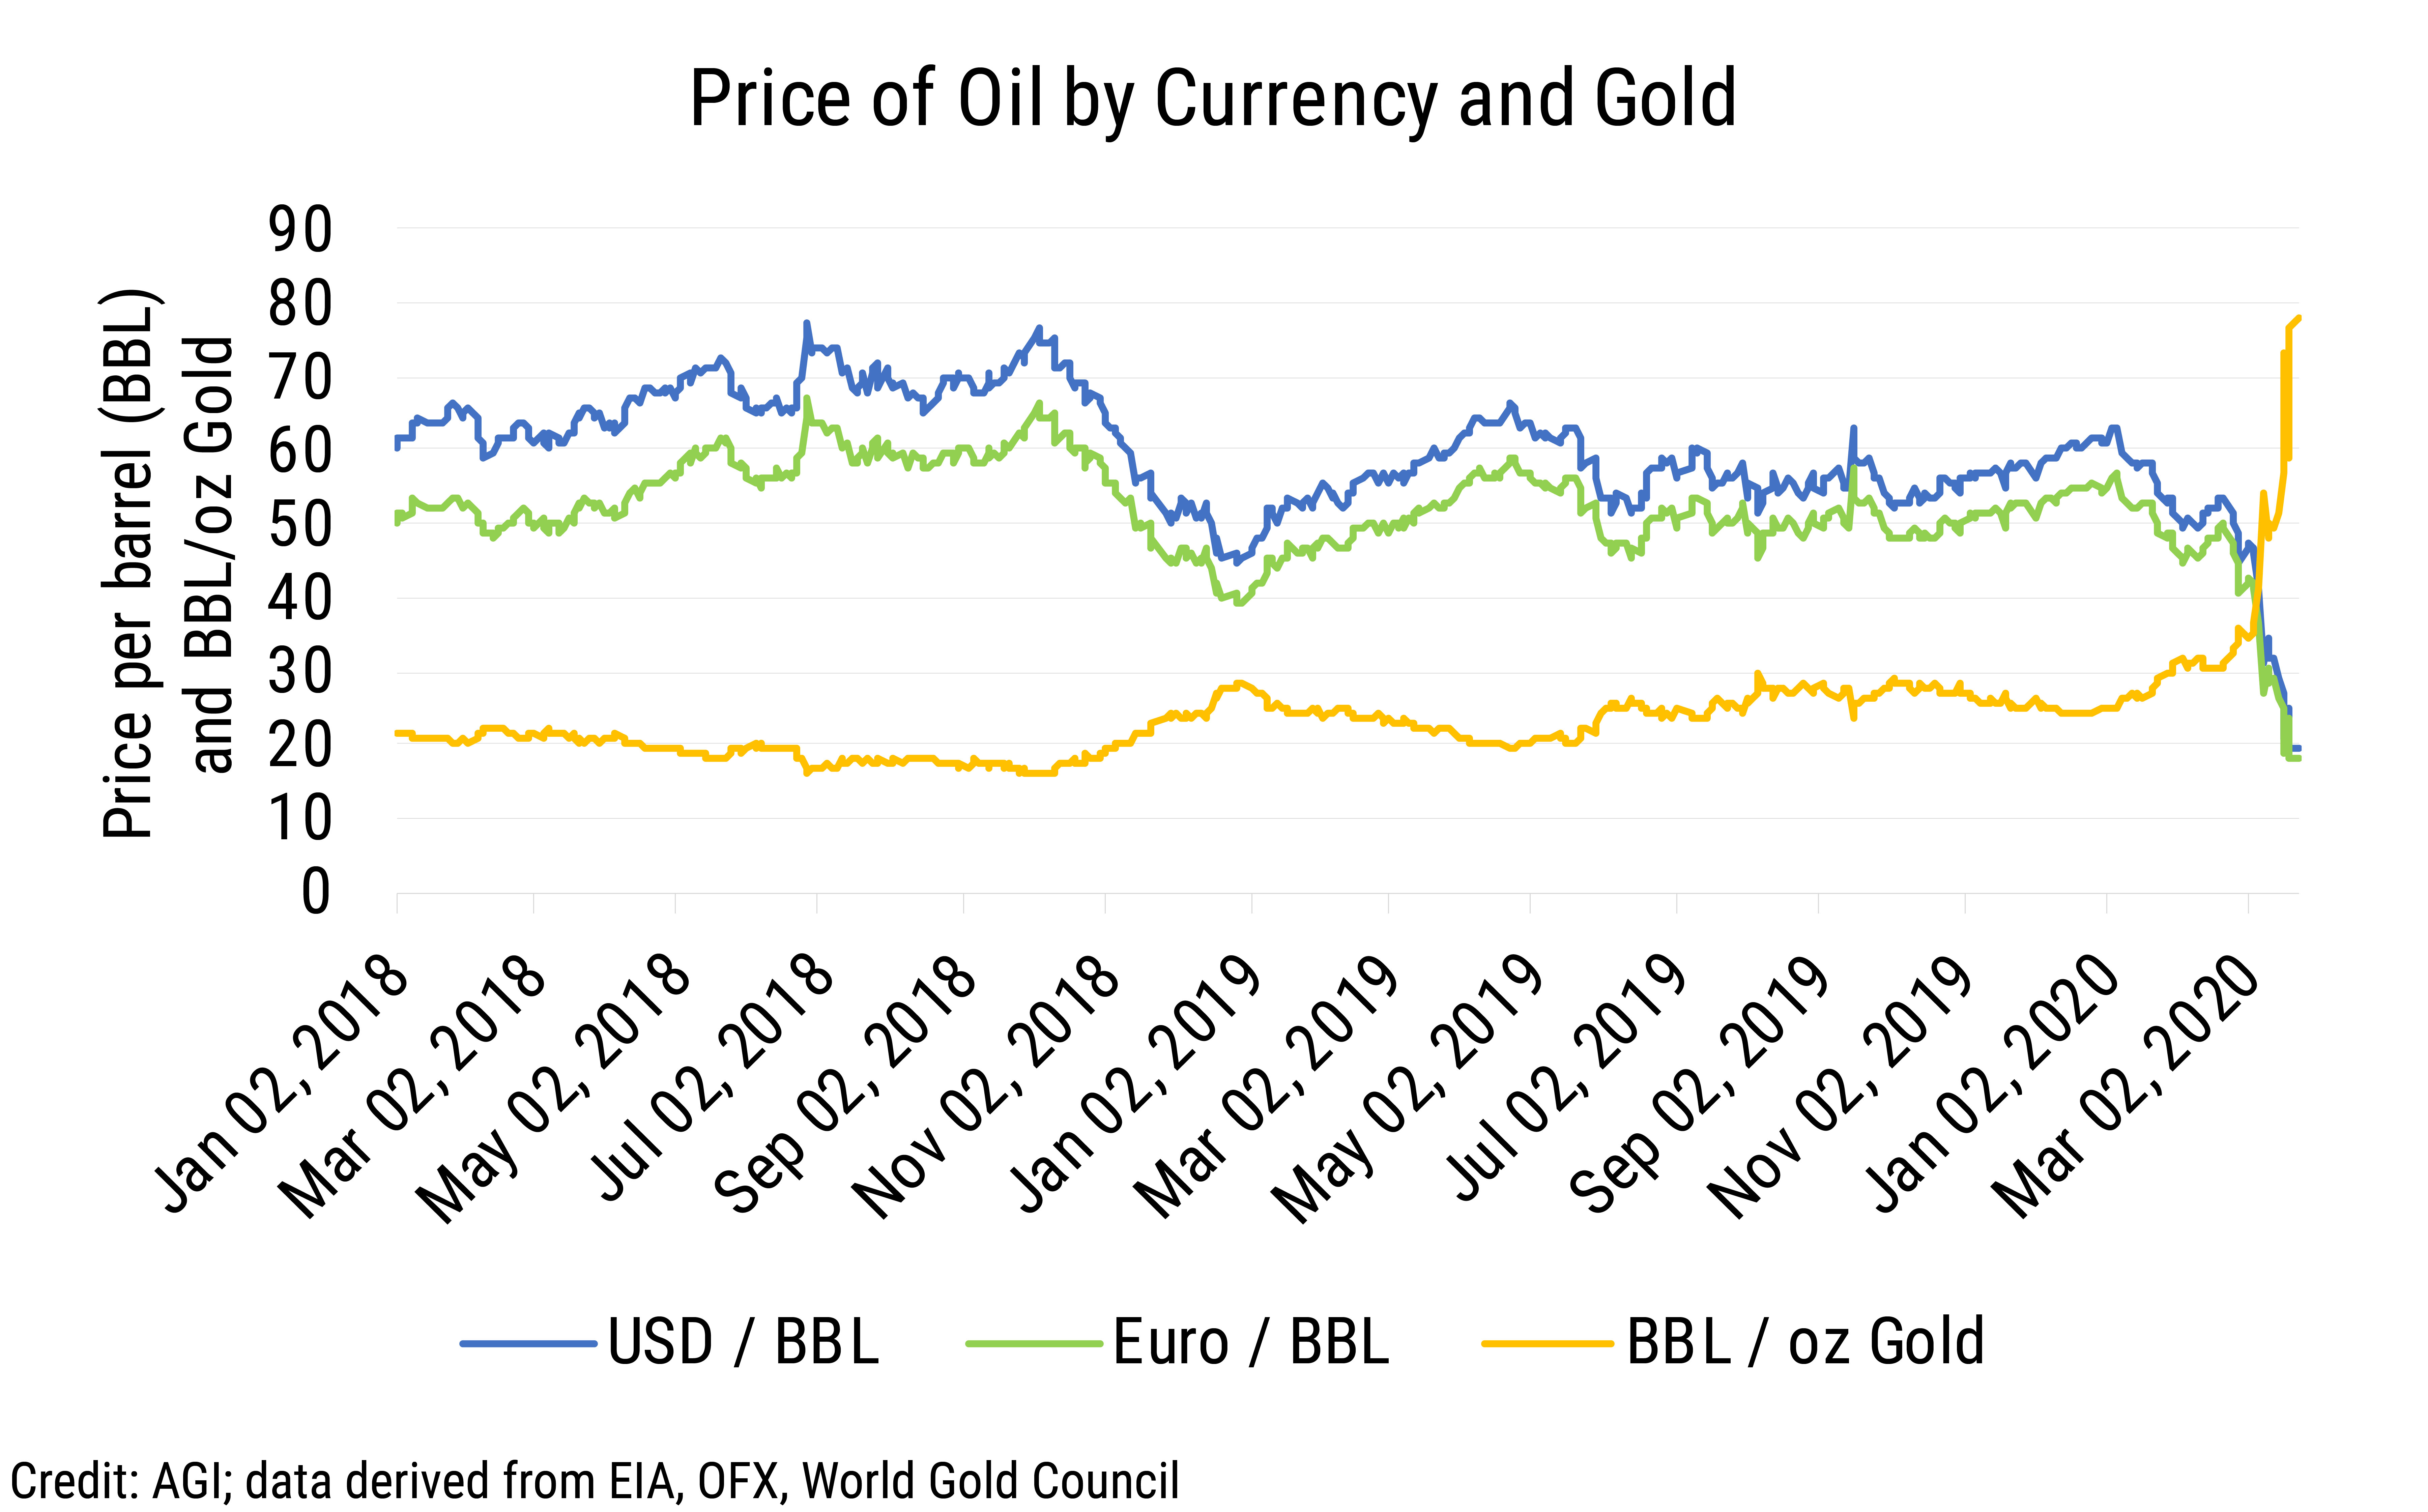 Data Brief 2020-003 chart 01: Price of Oil by Currency and Gold (credit: AGI; data derived from the EIA, OFX, World Gold Council)